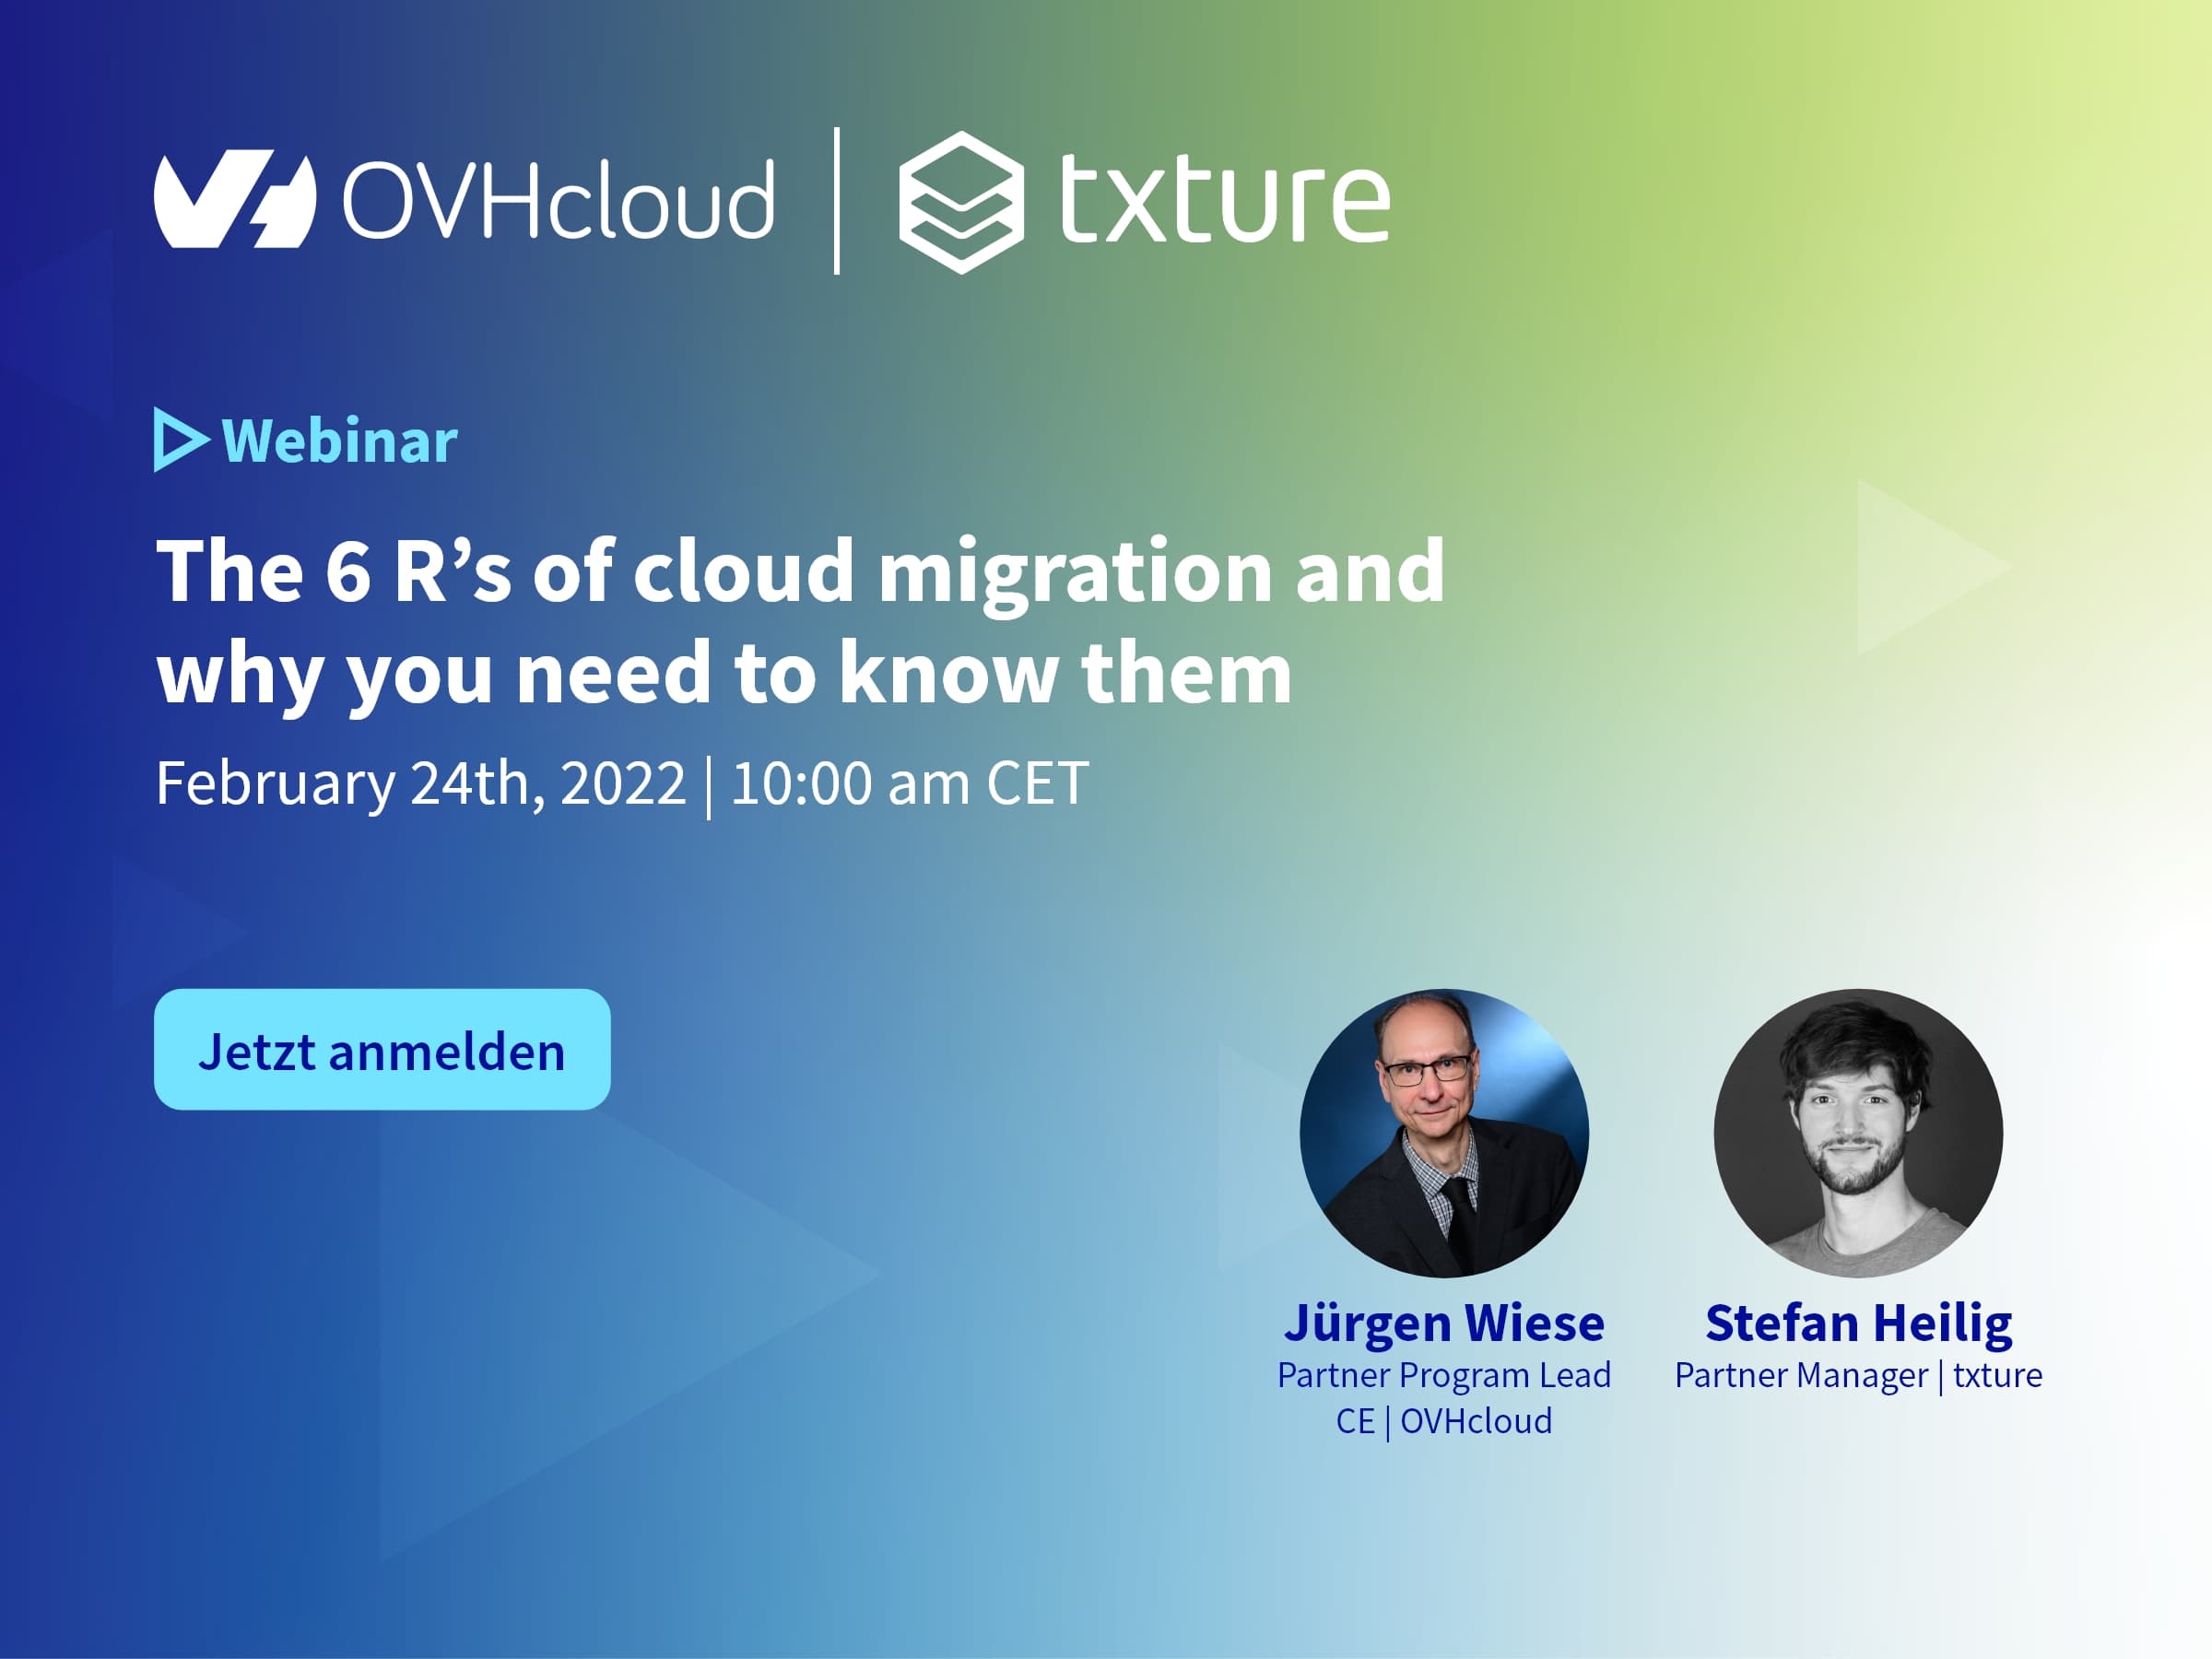 The 6 Rs of cloud migration and why you need to know them